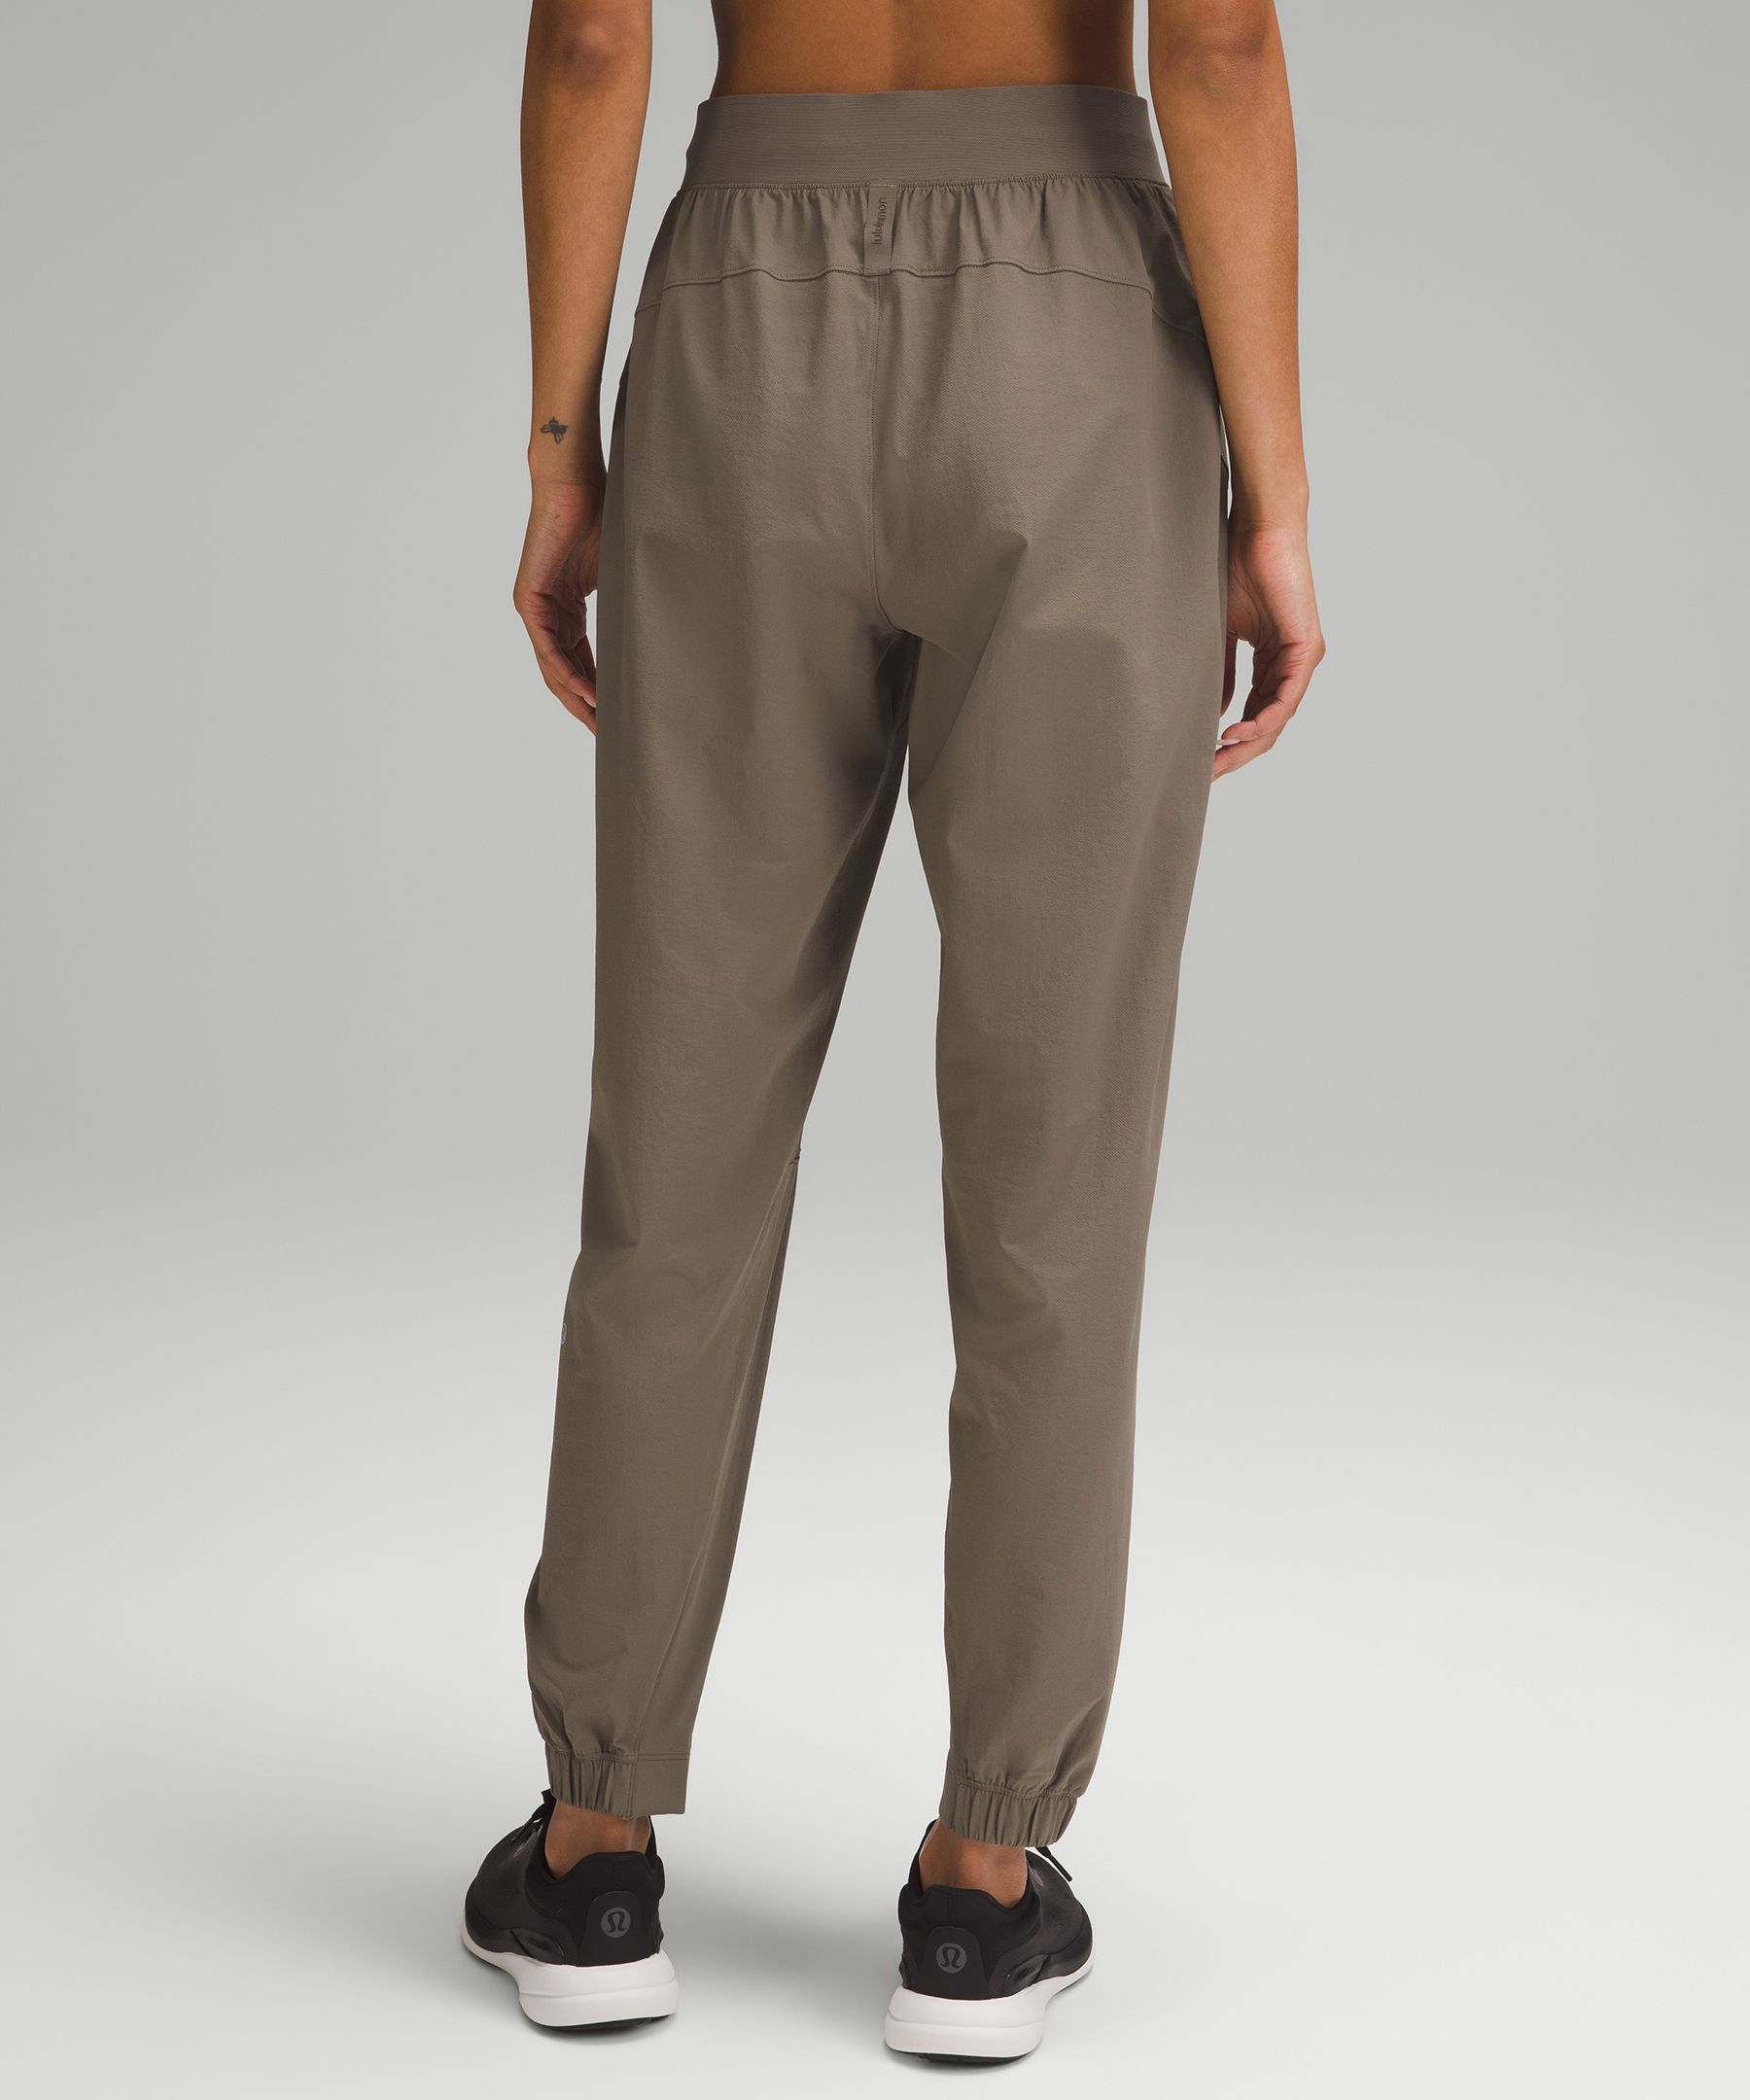 License to Train High-Rise Pant | Women's Joggers | lululemon 